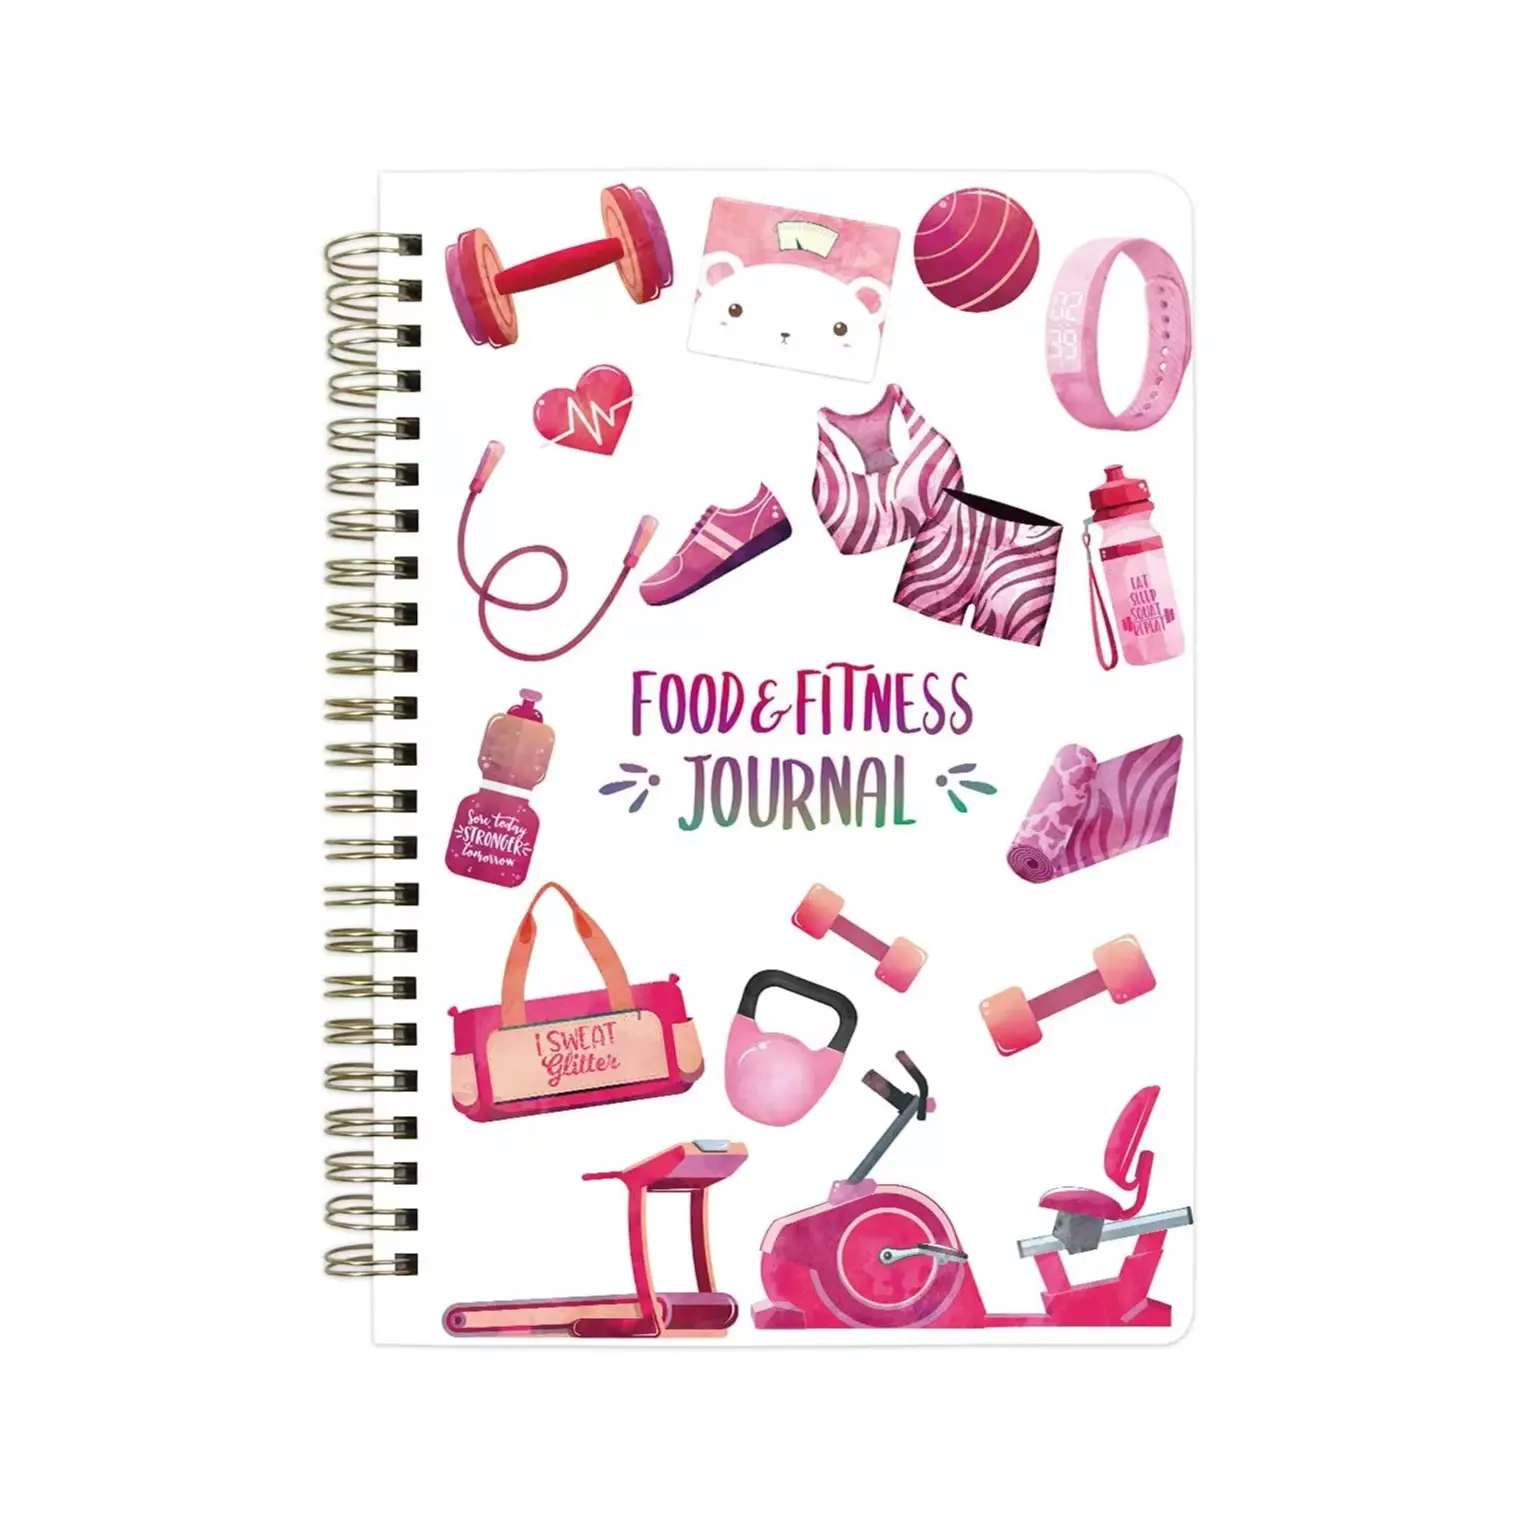 Food Nutrition Fitness Journal Weight Loss Wellness Workout Calorie Counter Log Diary Notebook Planner